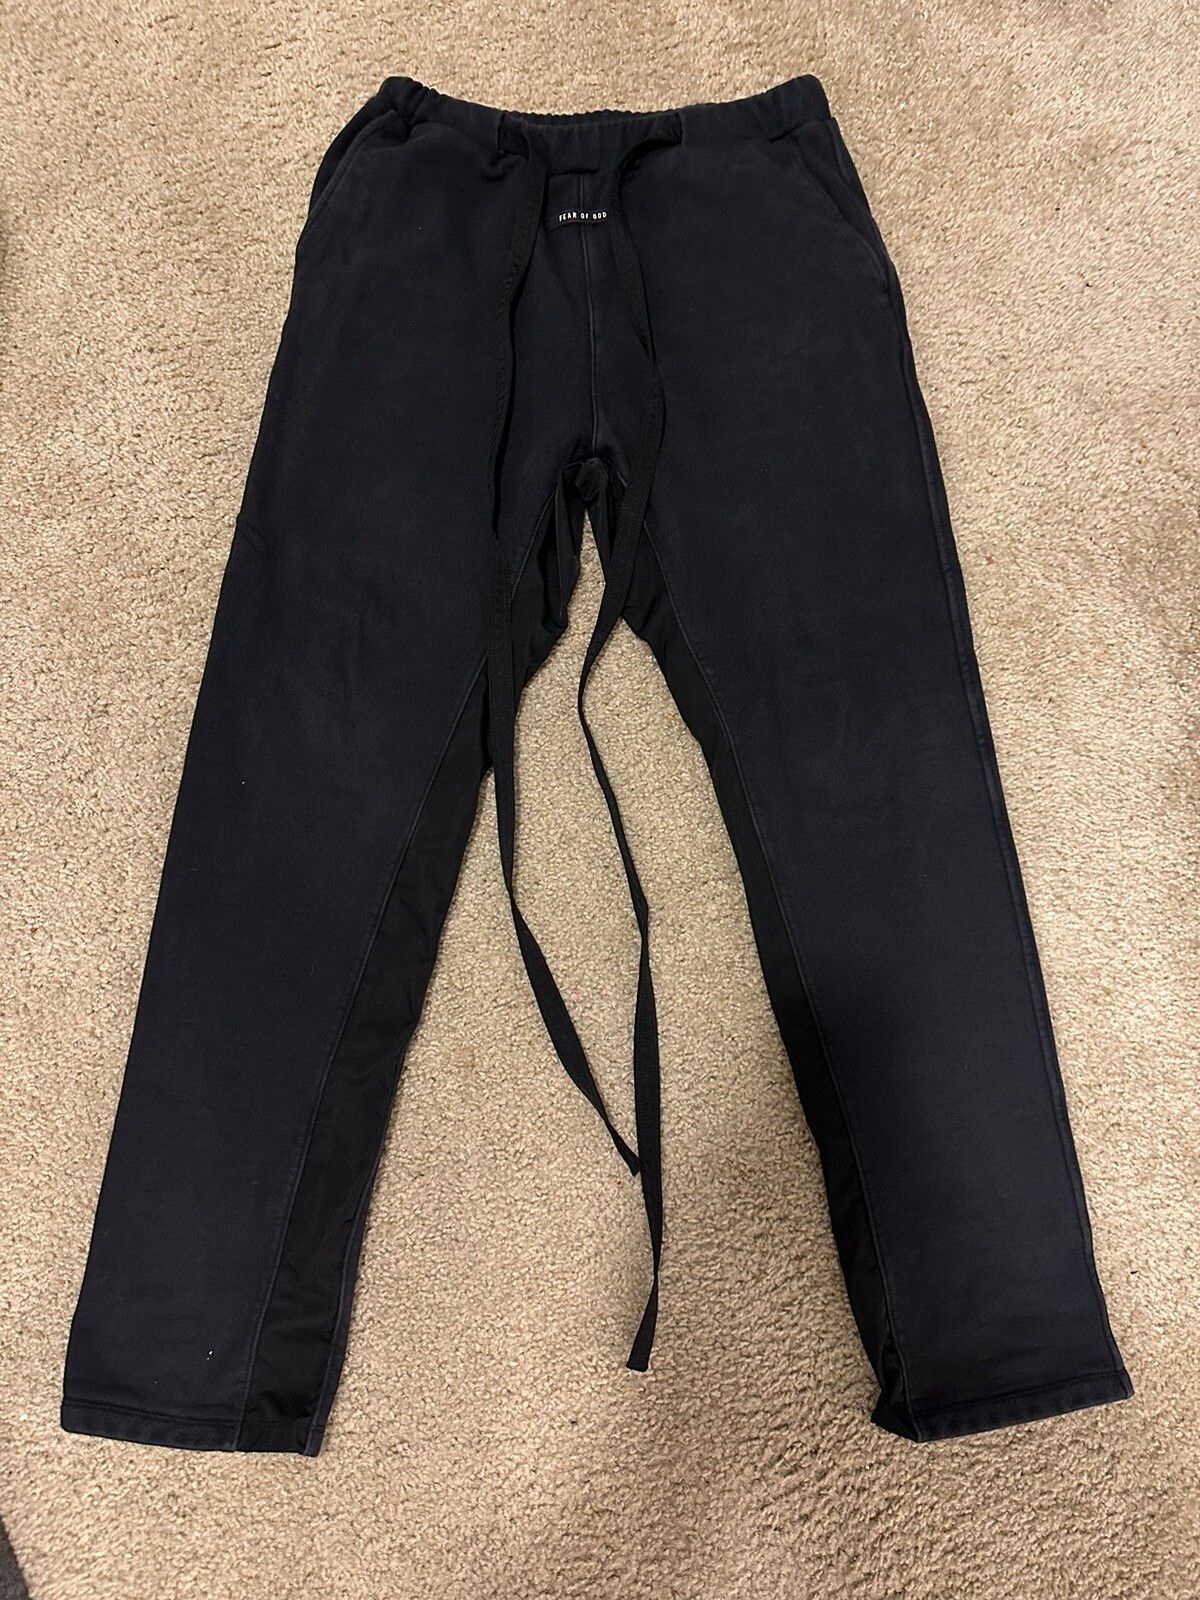 Pre-owned Fear Of God Sixth Collection Faded Black Lounge Bottoms/sweatpants